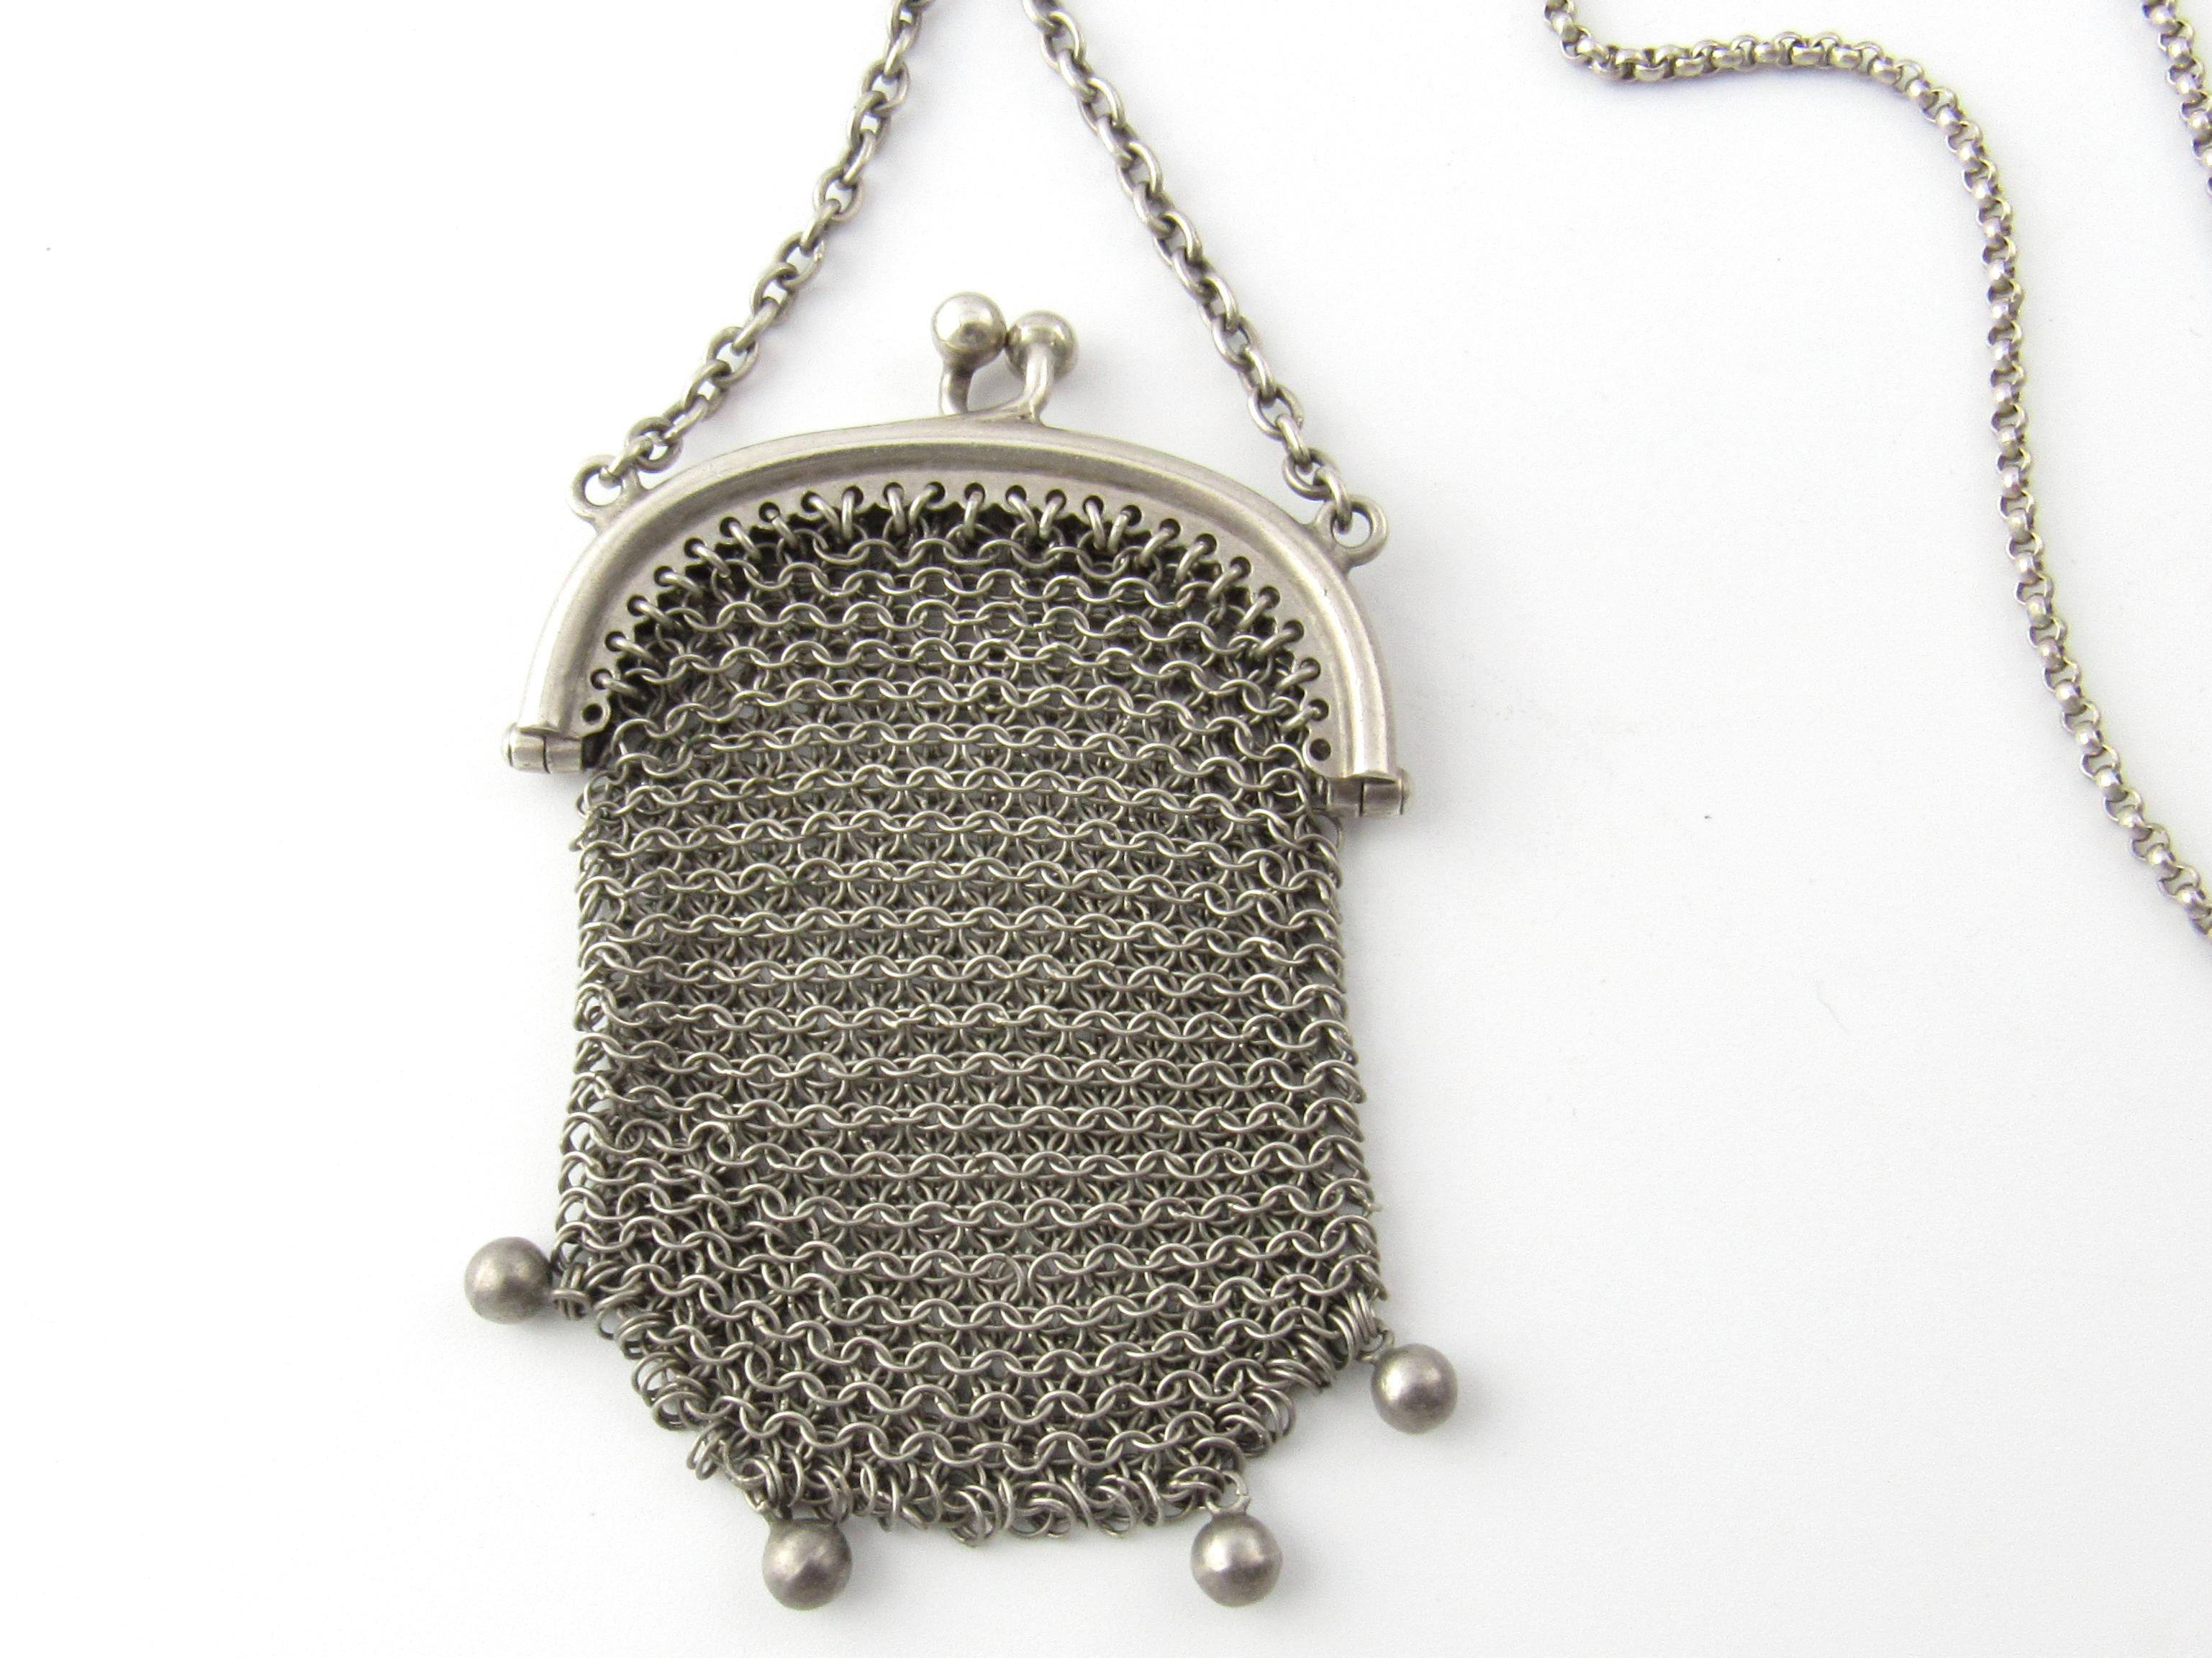 Sterling Silver Mesh Purse on Chain Necklace

This is a lovely sterling silver mesh purse on a chain. You will simply be delighted with the condition, style, and uniqueness of this beautiful purse!

Measurement: Purse measures 2 1/2 inches in